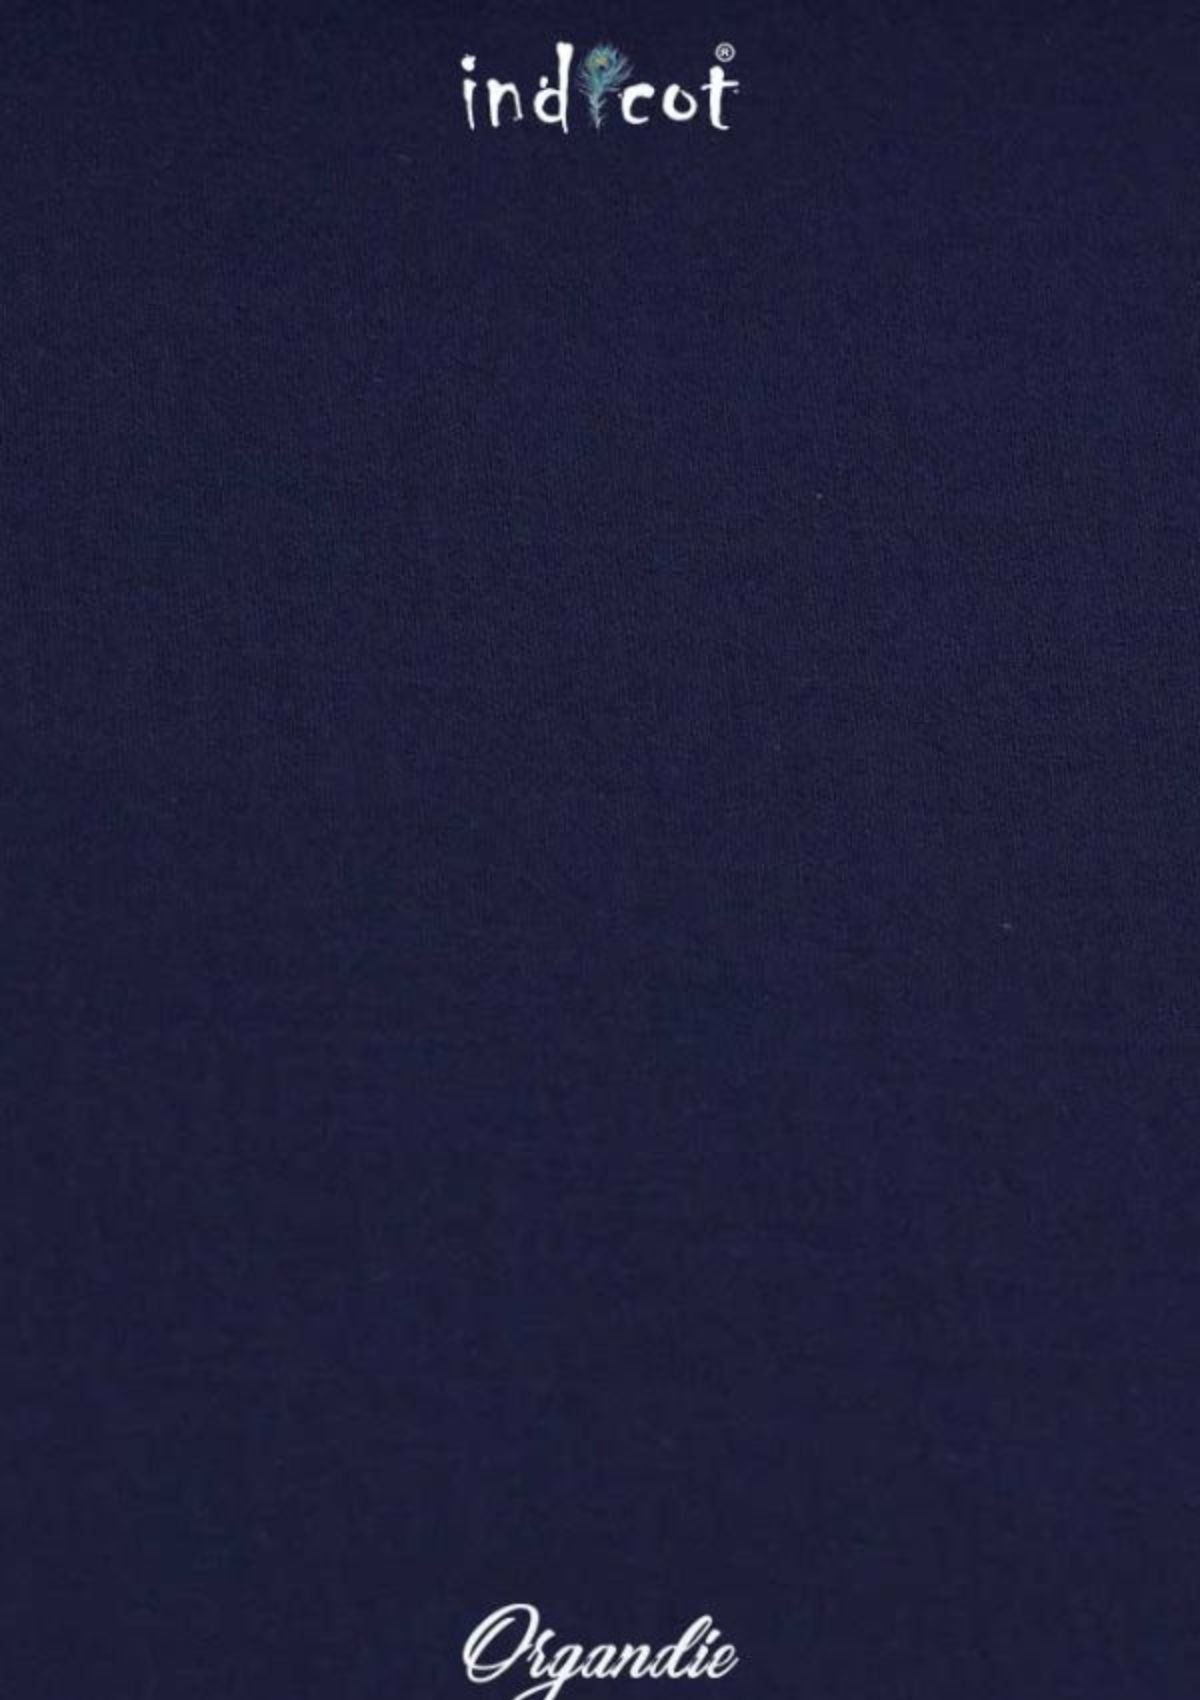 Indicot Organdie Color#15 Navy available at Saleem Fabrics Traditions